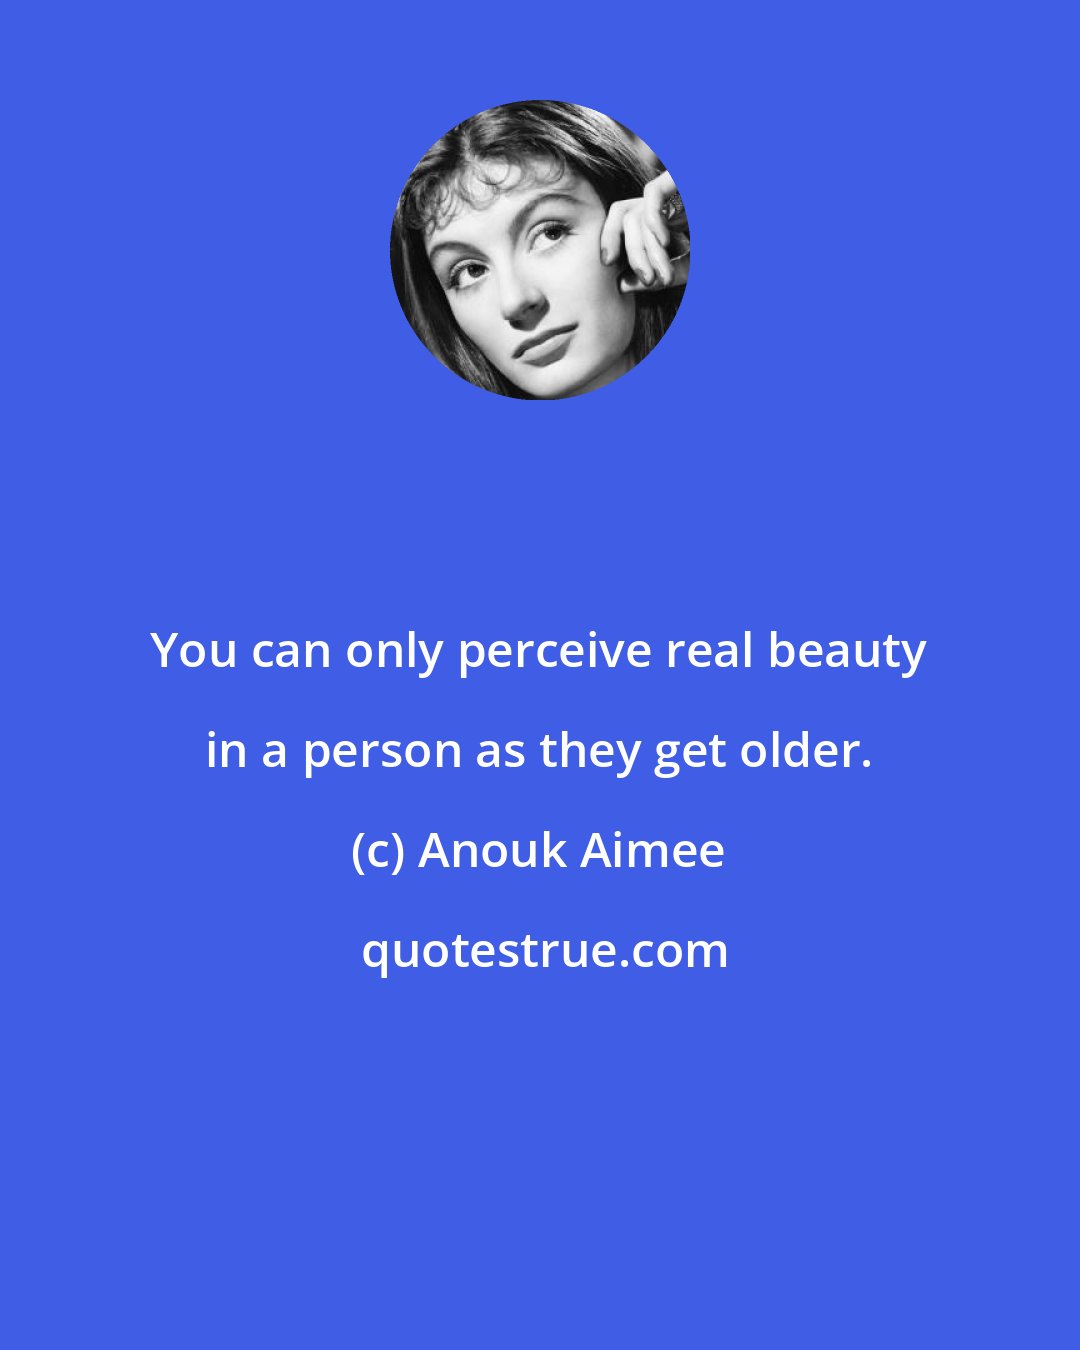 Anouk Aimee: You can only perceive real beauty in a person as they get older.